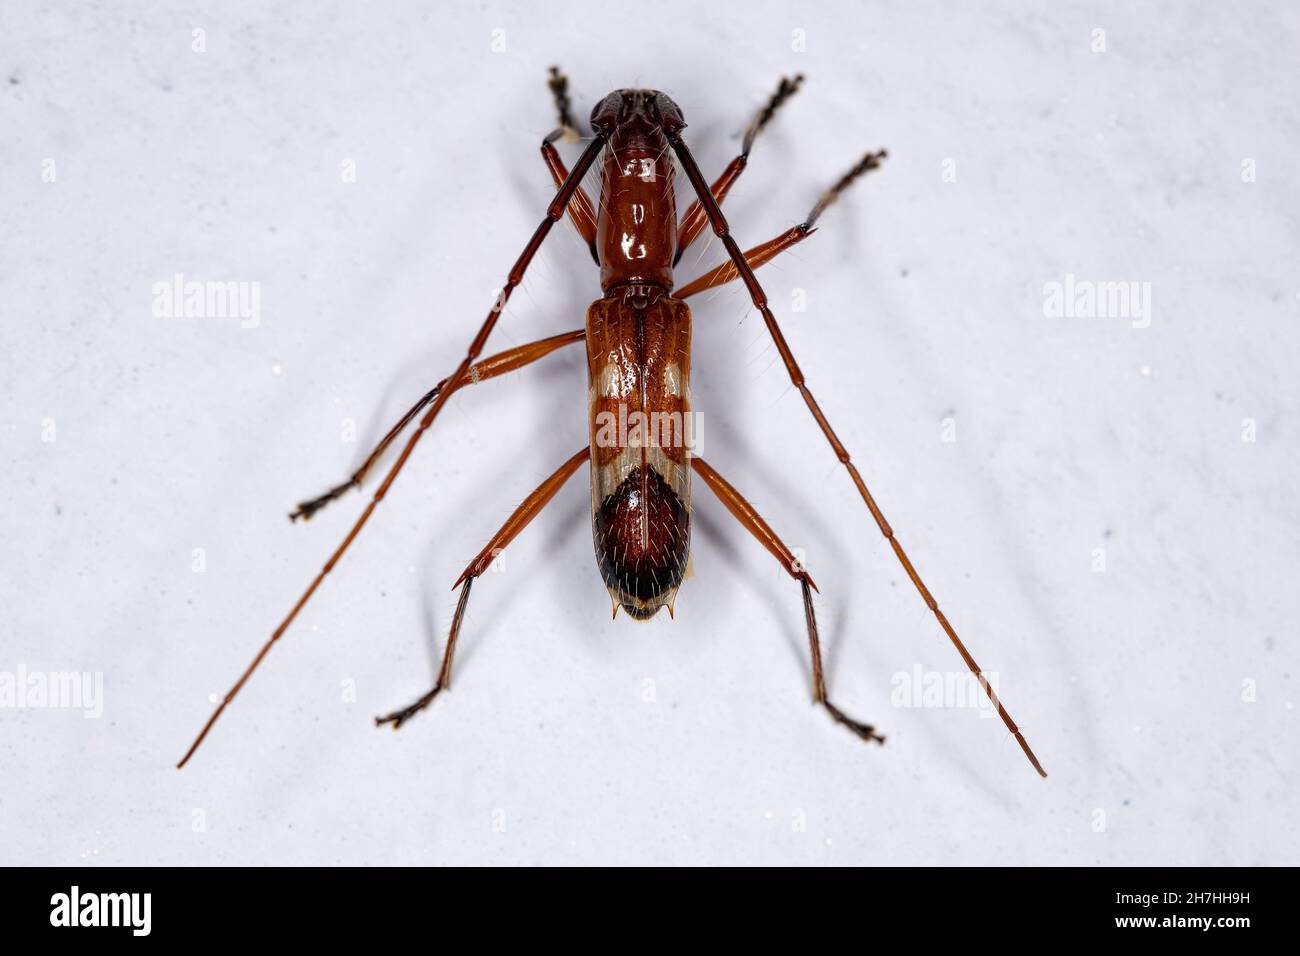 Adult Typical Longhorn Beetle of the Subfamily Cerambycinae Stock Photo